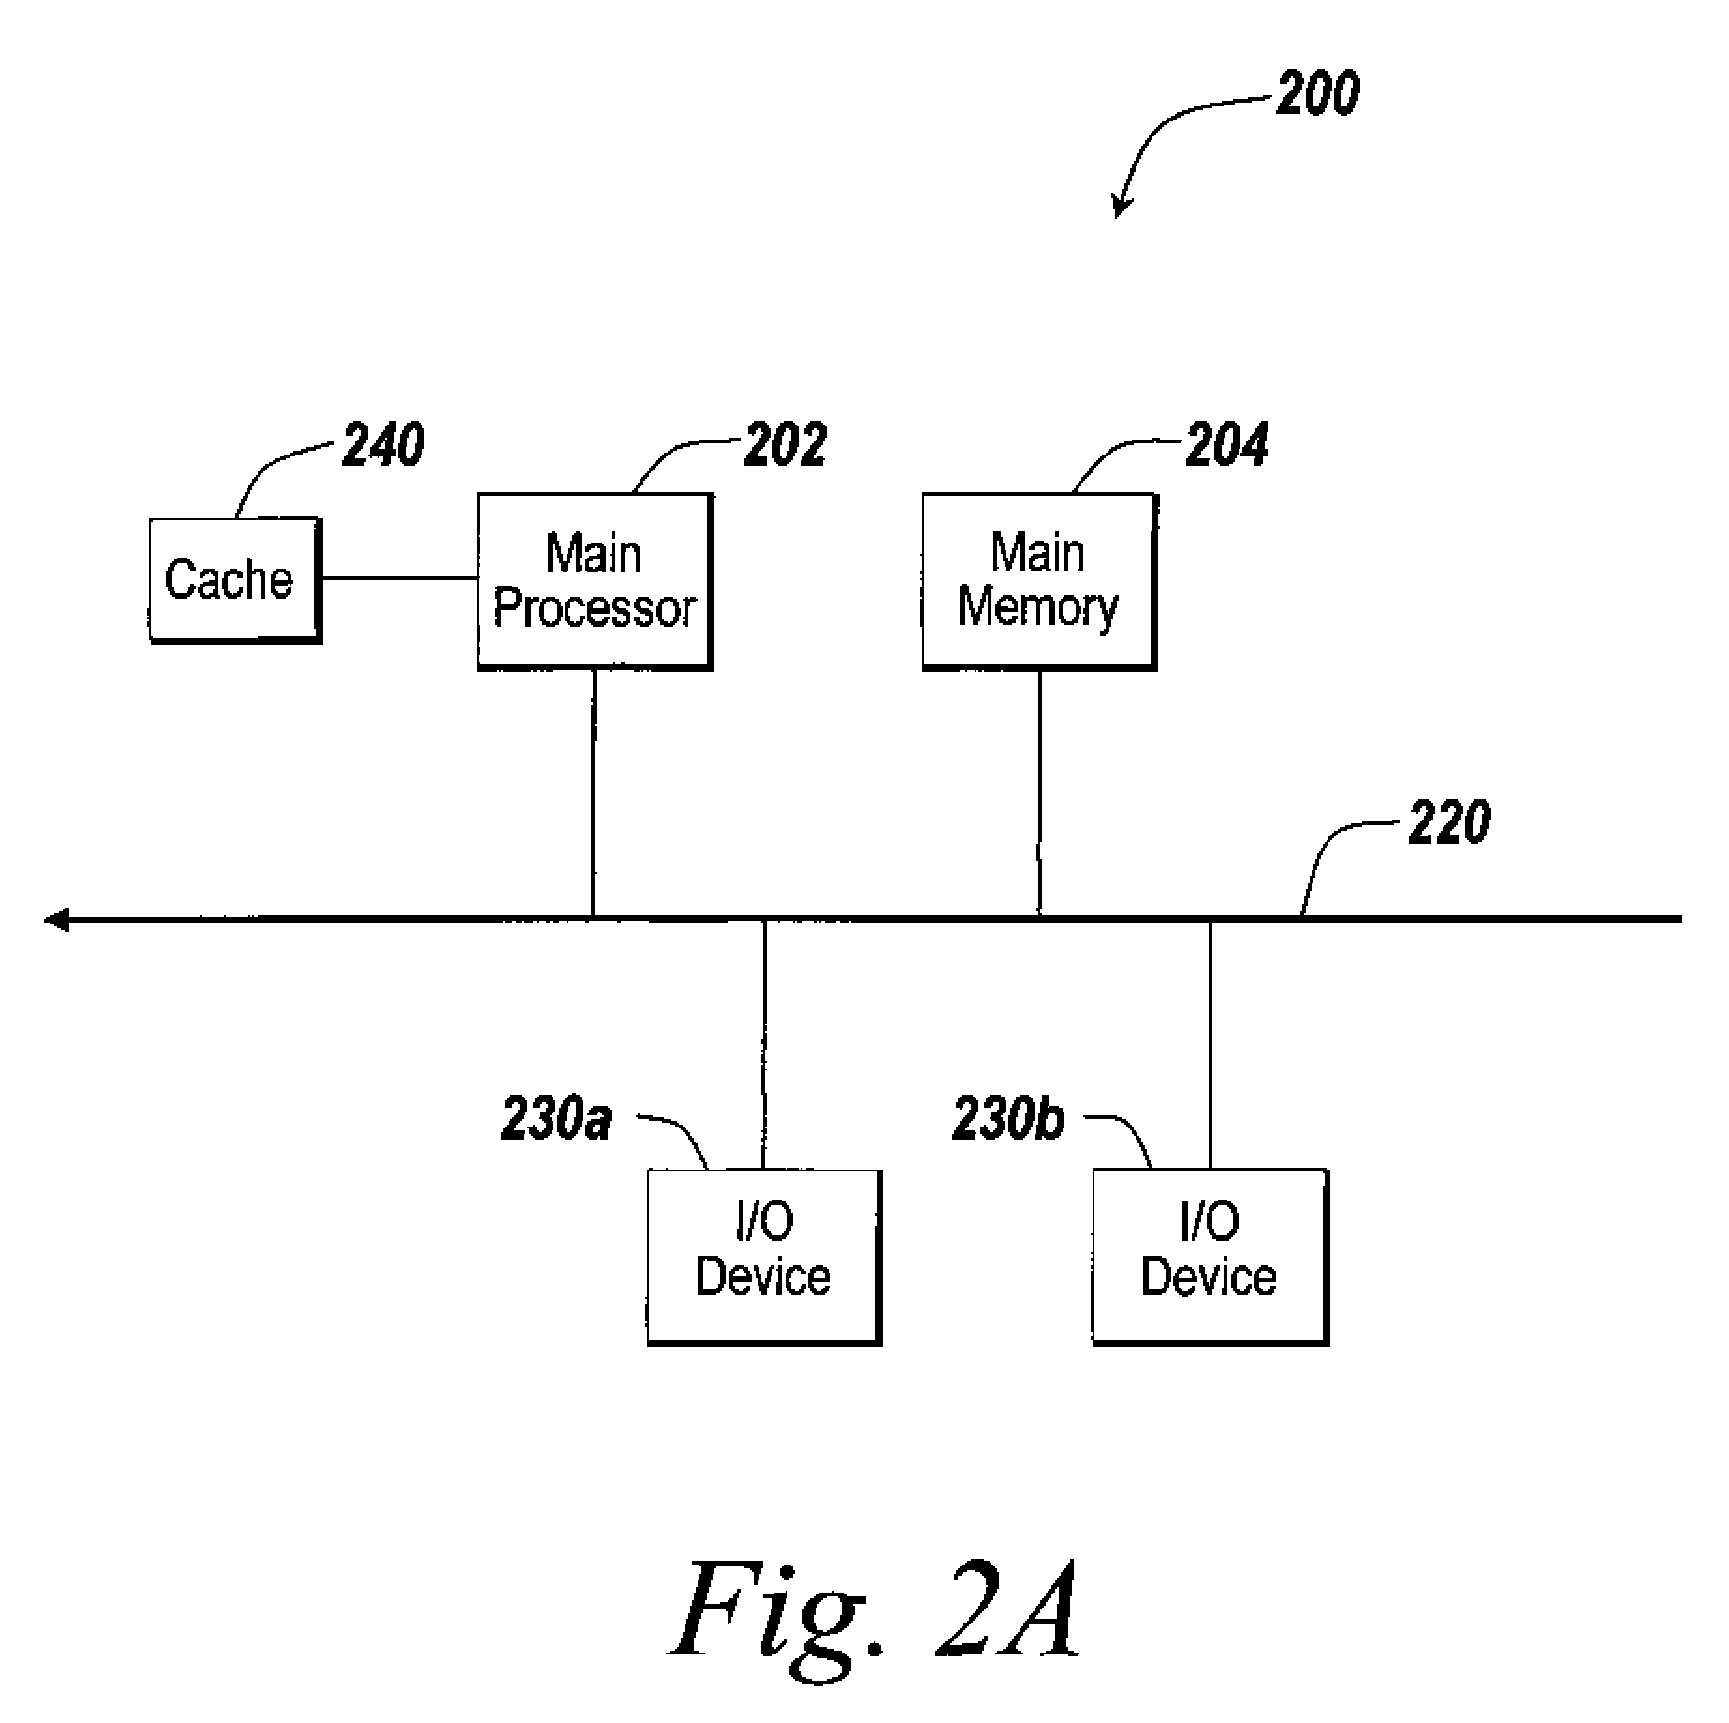 Method for maintaining transaction integrity across multiple remote access servers